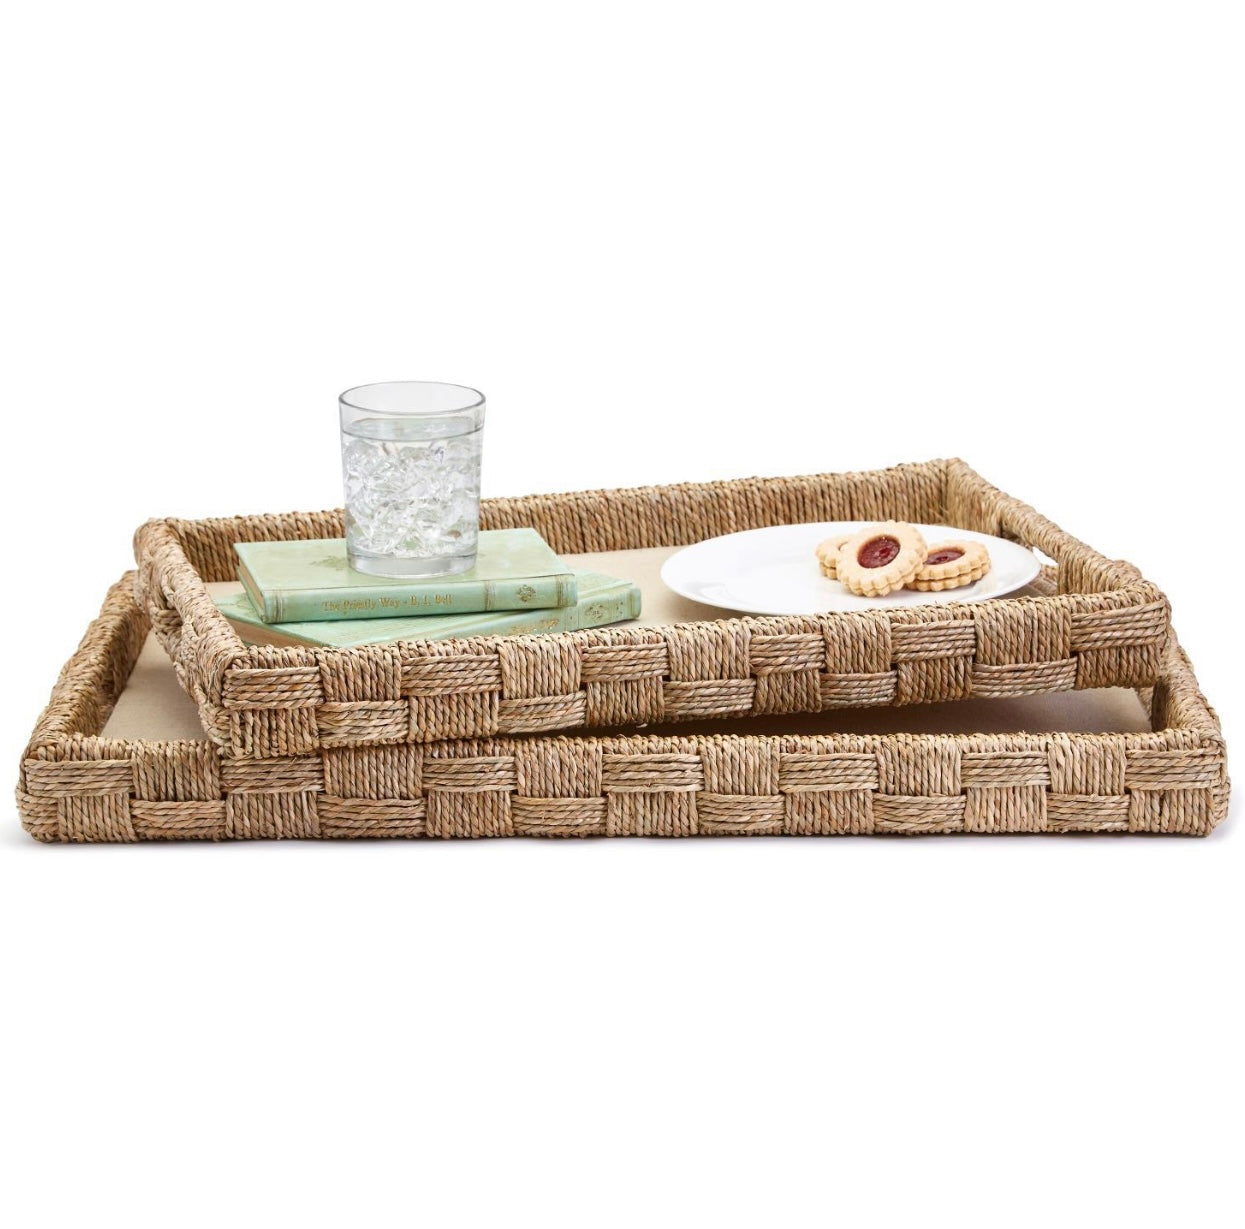 Sea Grass and Rattan Oversized Decorative Tray ~ 2 sizes